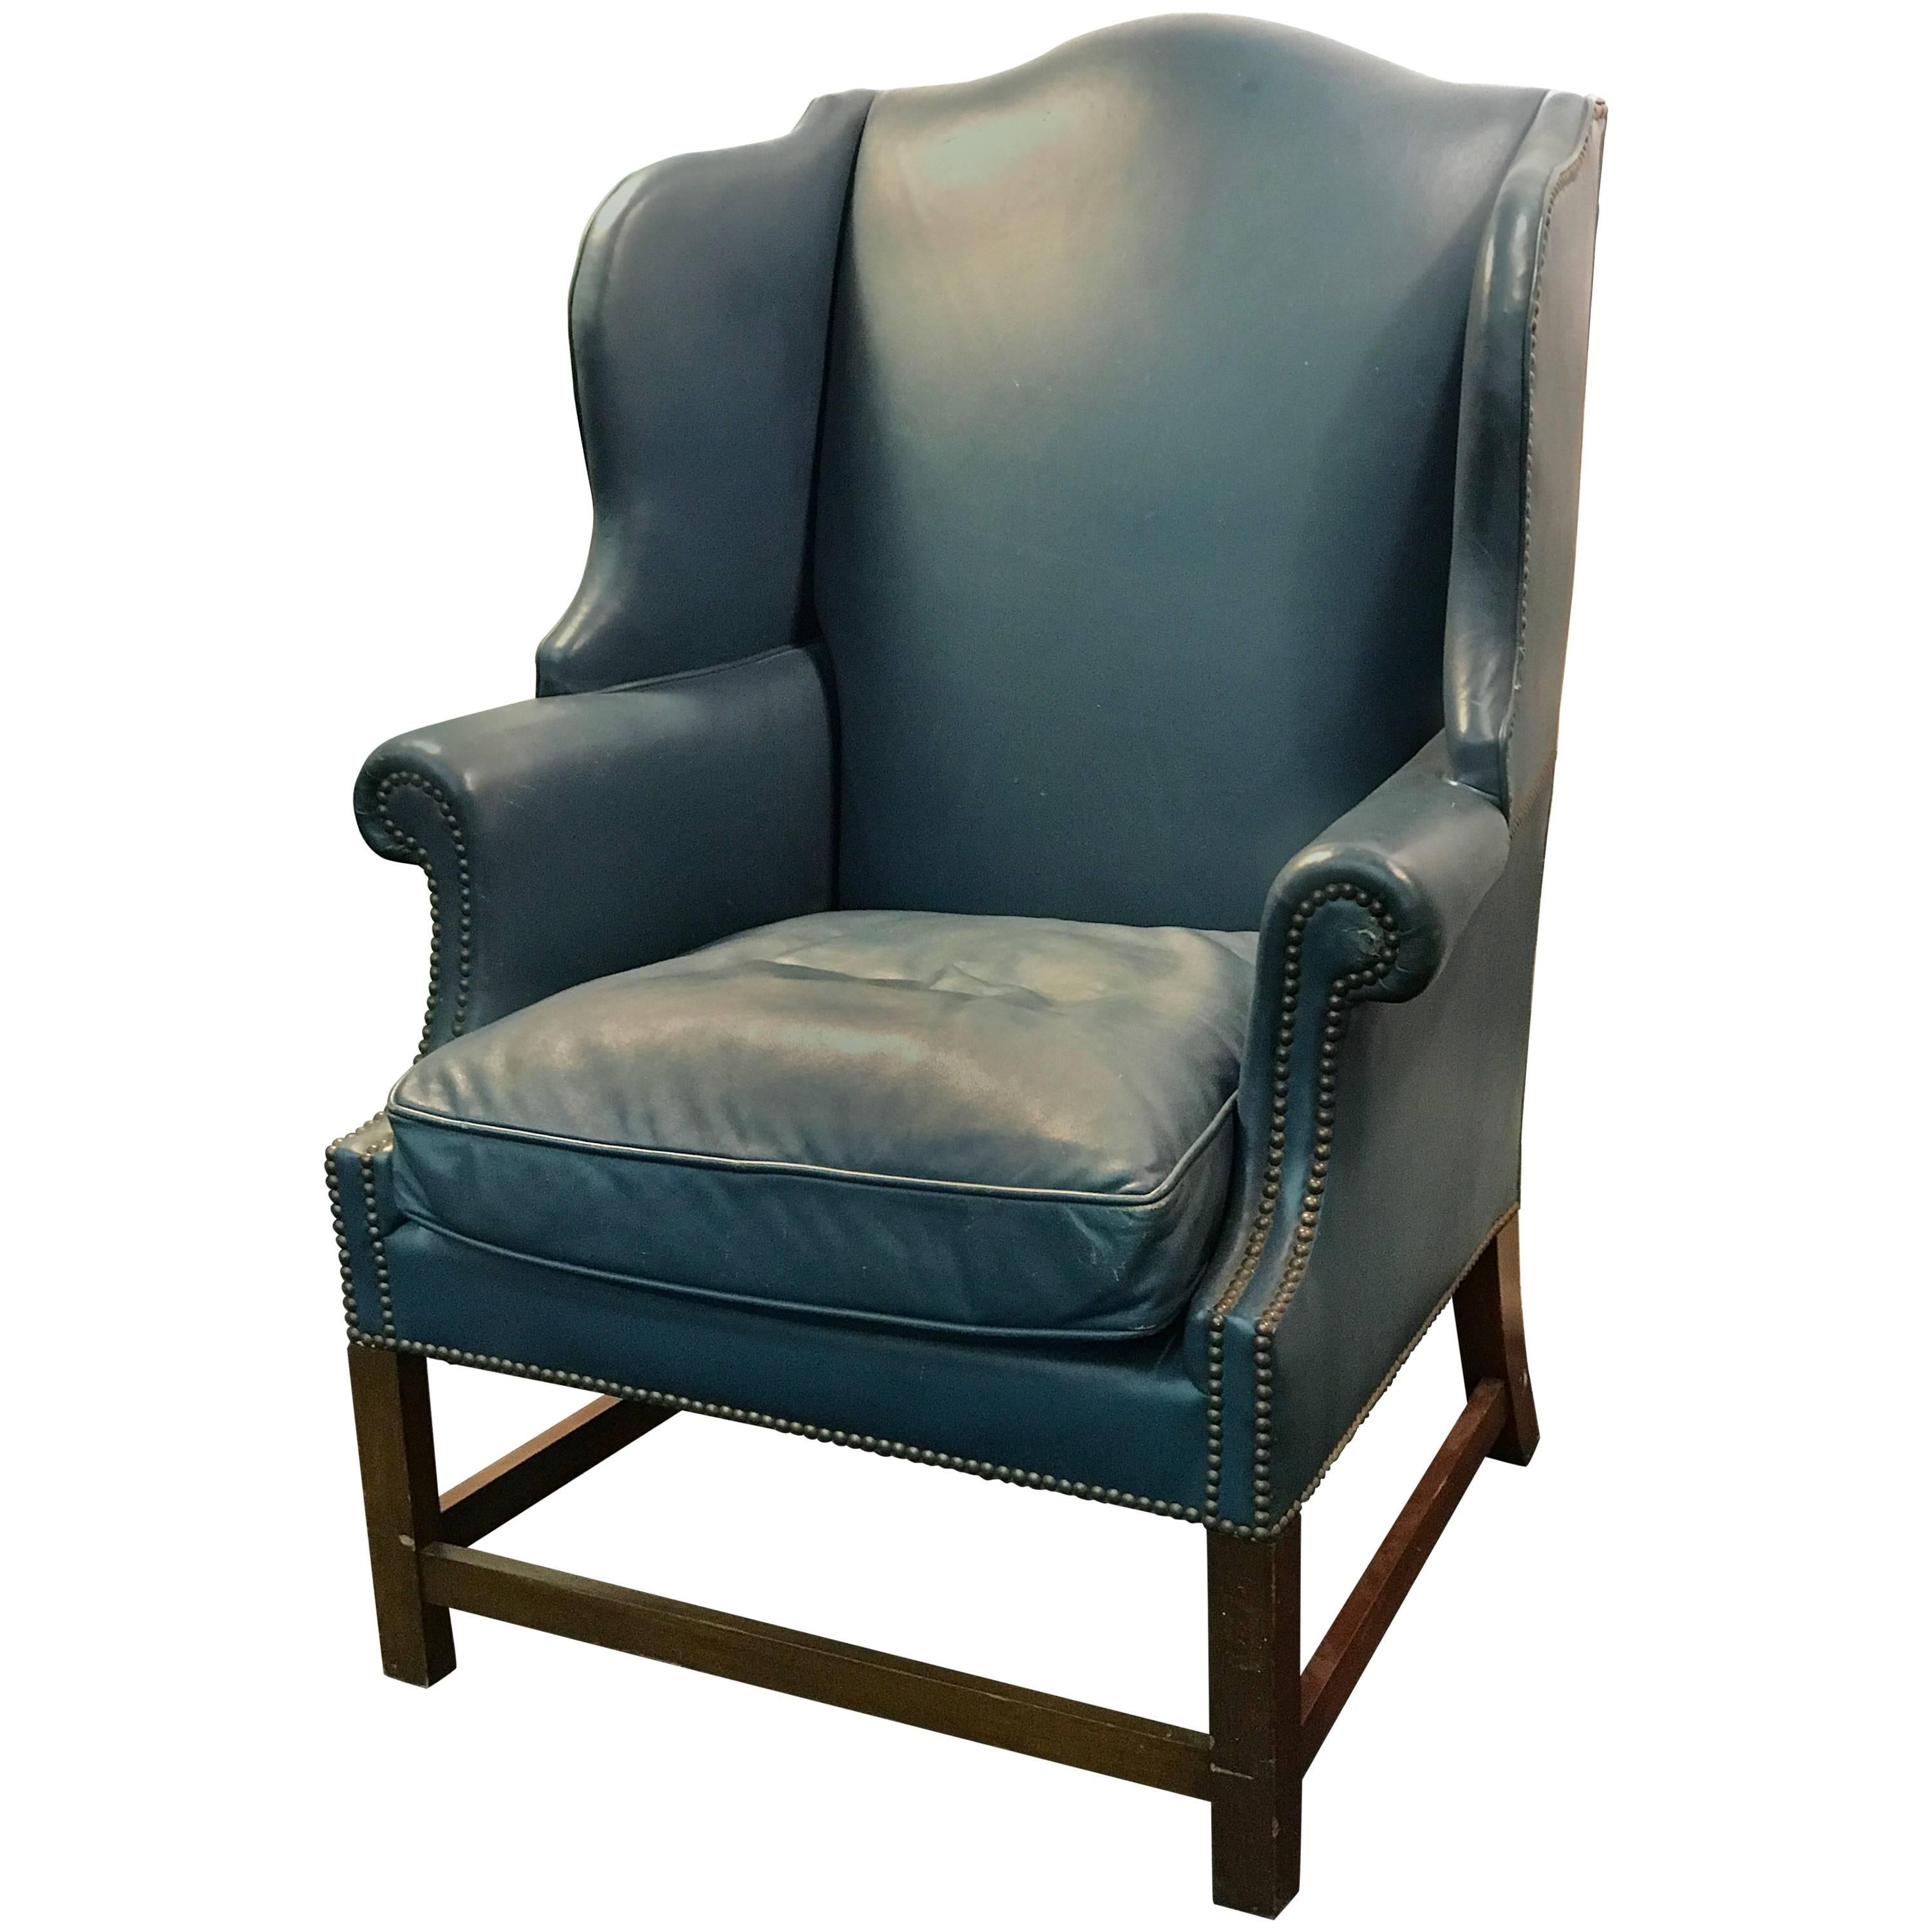 Wonderful Wingback Chair with Beautiful Blue Original Leather Upholstery For Sale